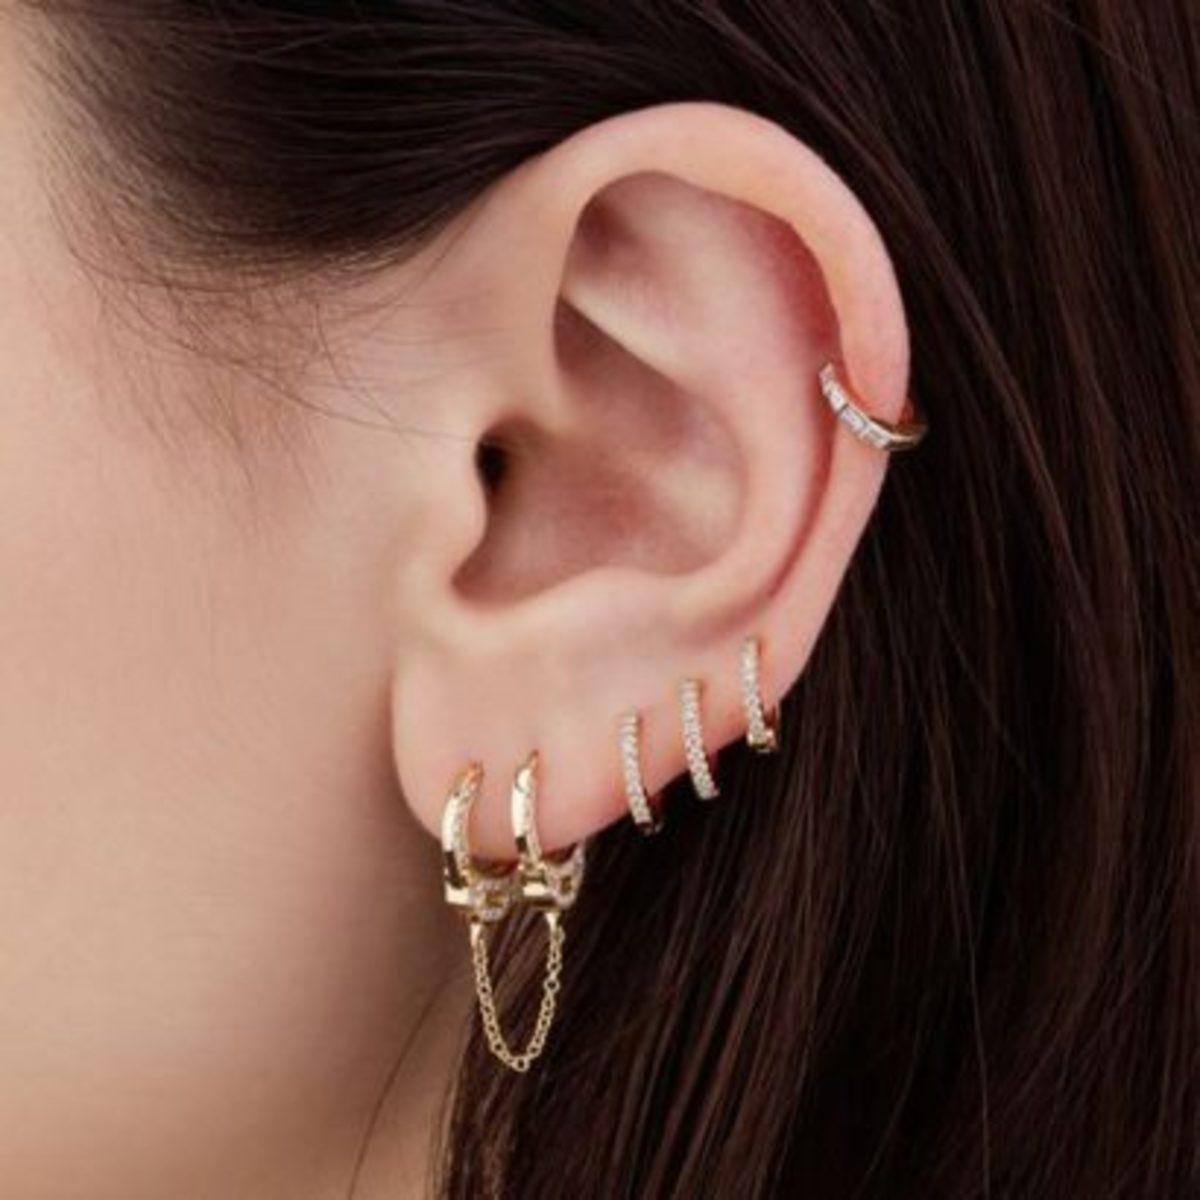 Earlobe Piercing Guide: Where to Get Them and Aftercare